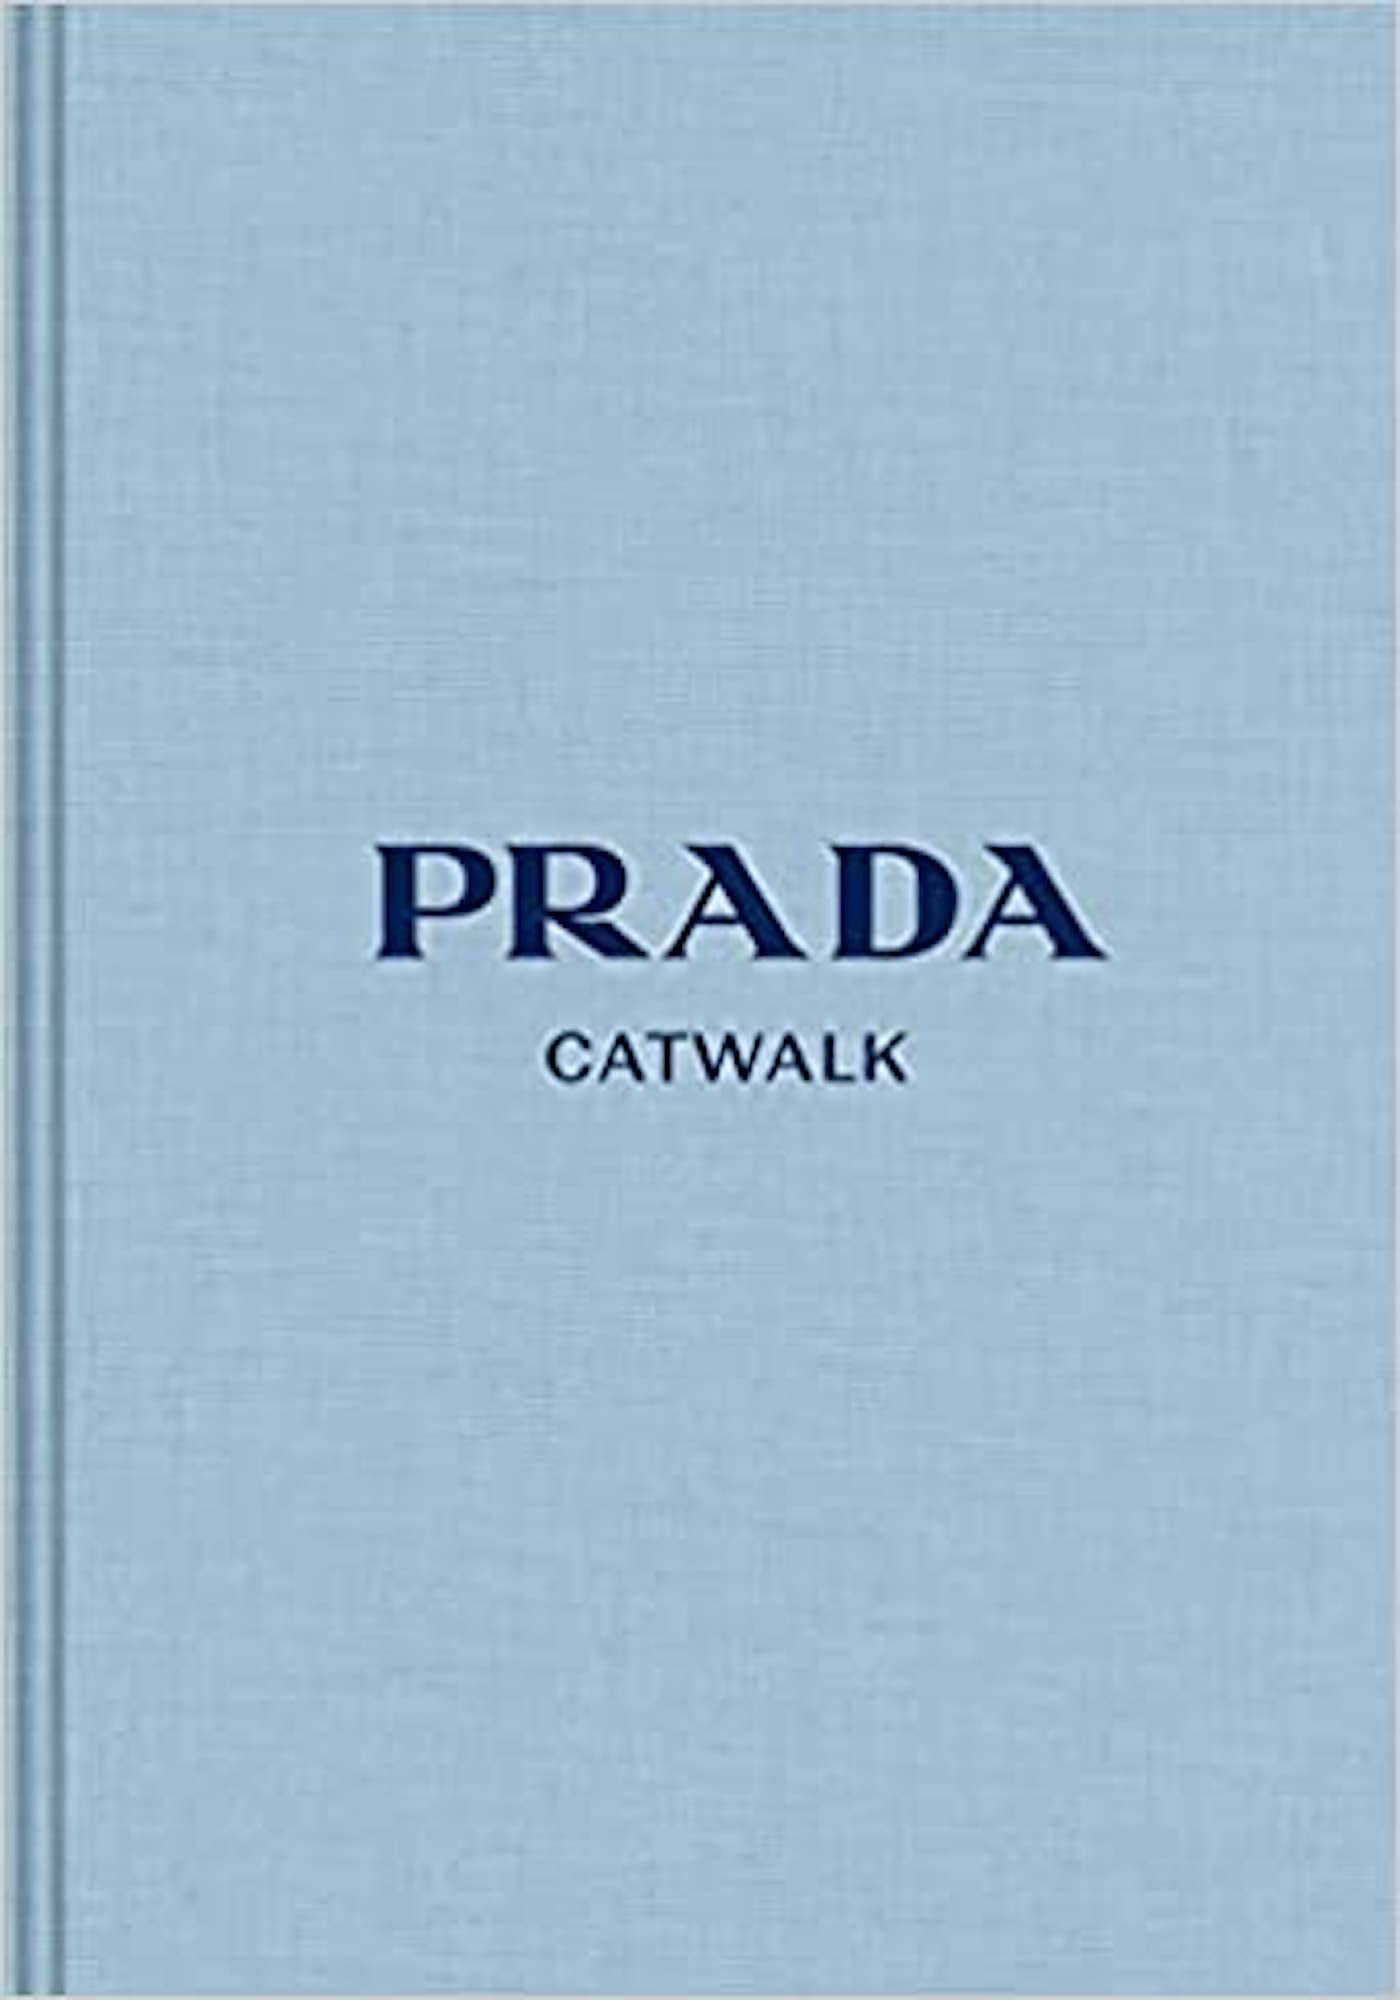 PRADA: THE COMPLETE COLLECTION